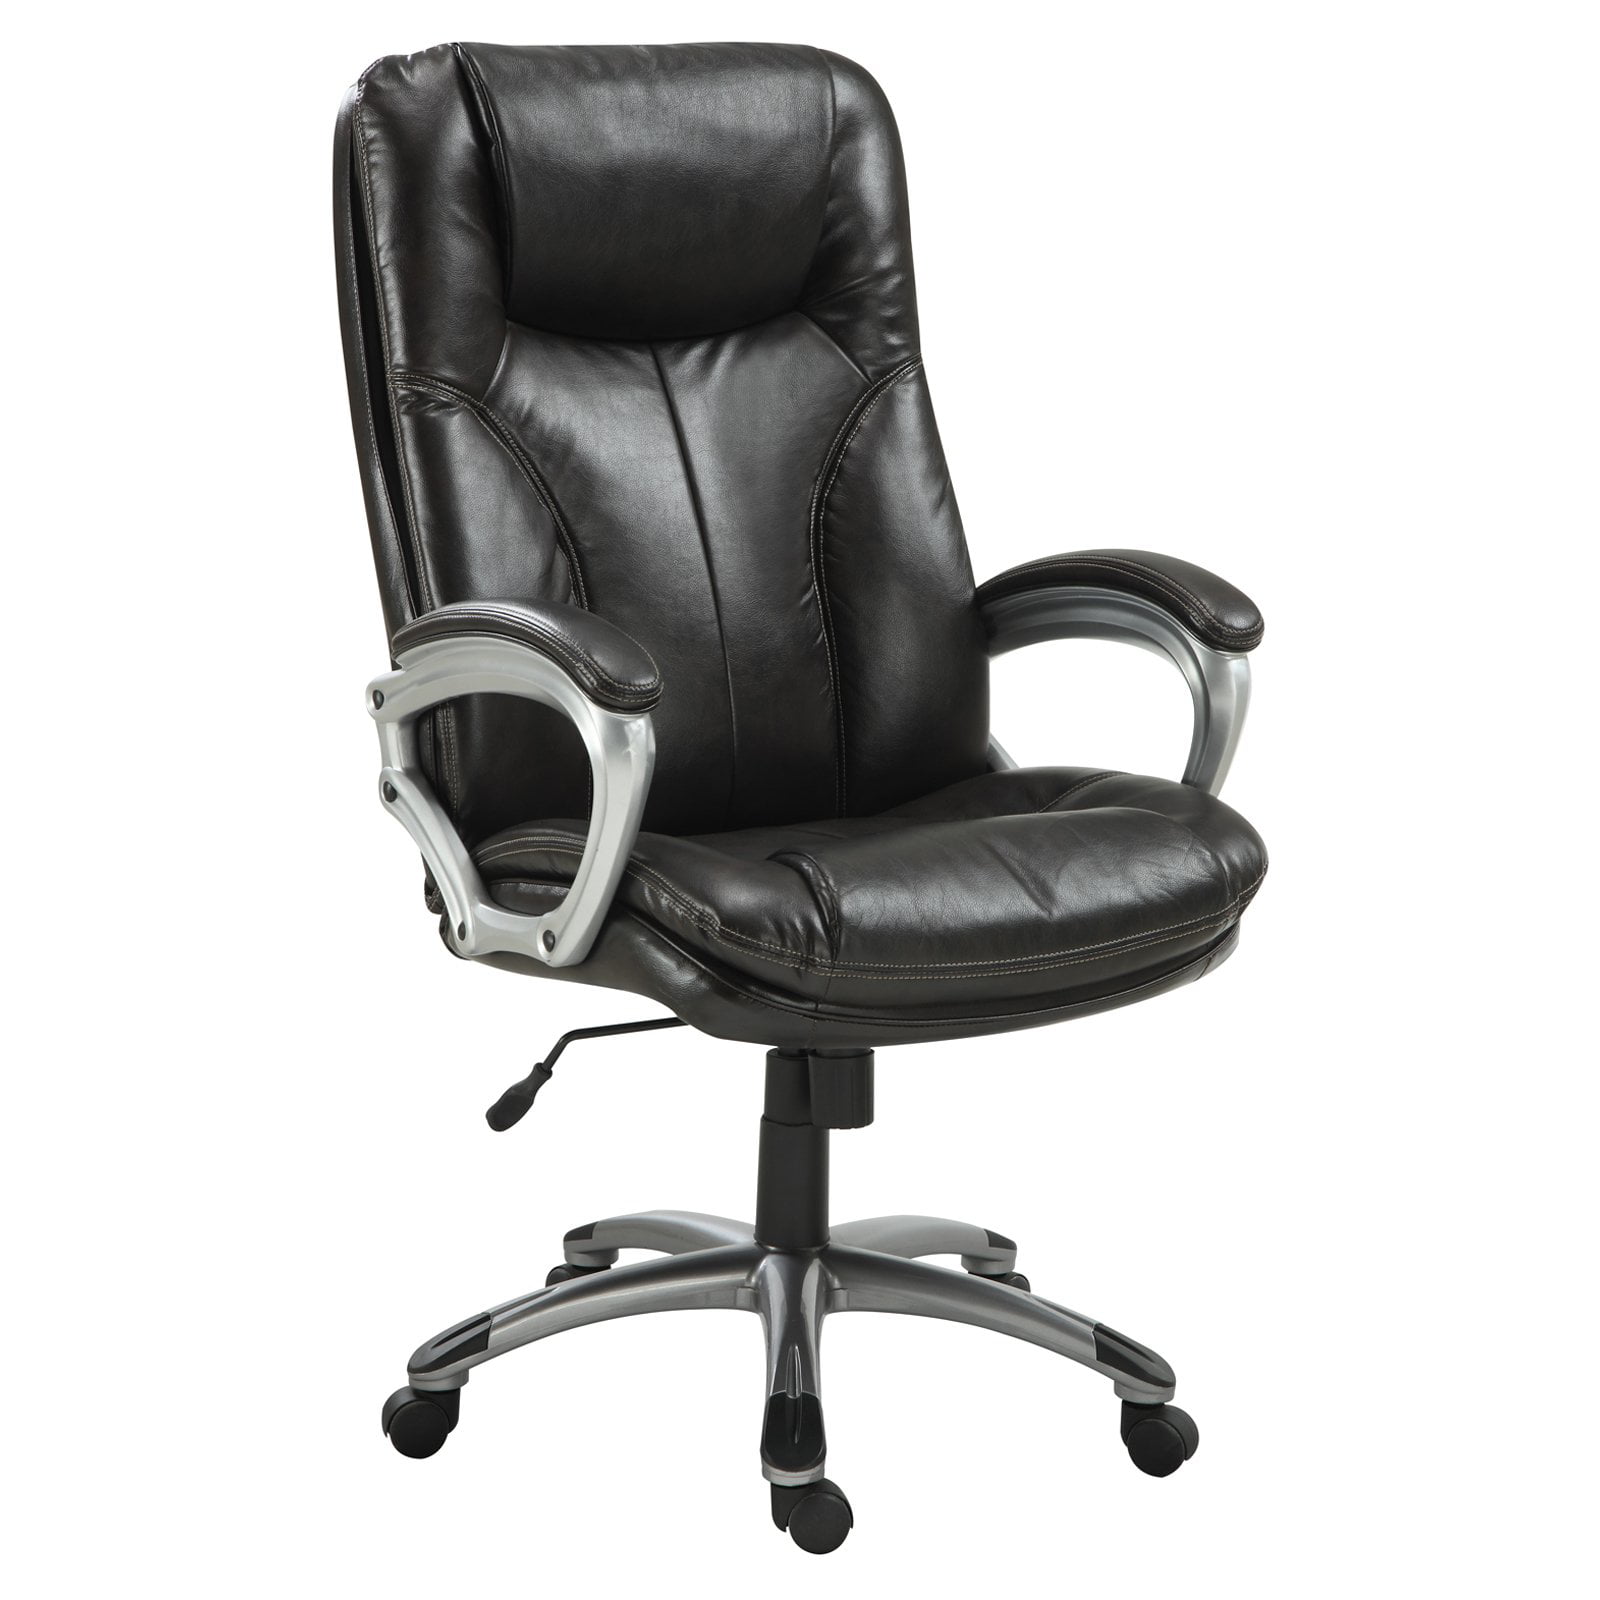 Serta Executive Big&Tall Office Chair, Puresoft Faux Leather, Roasted